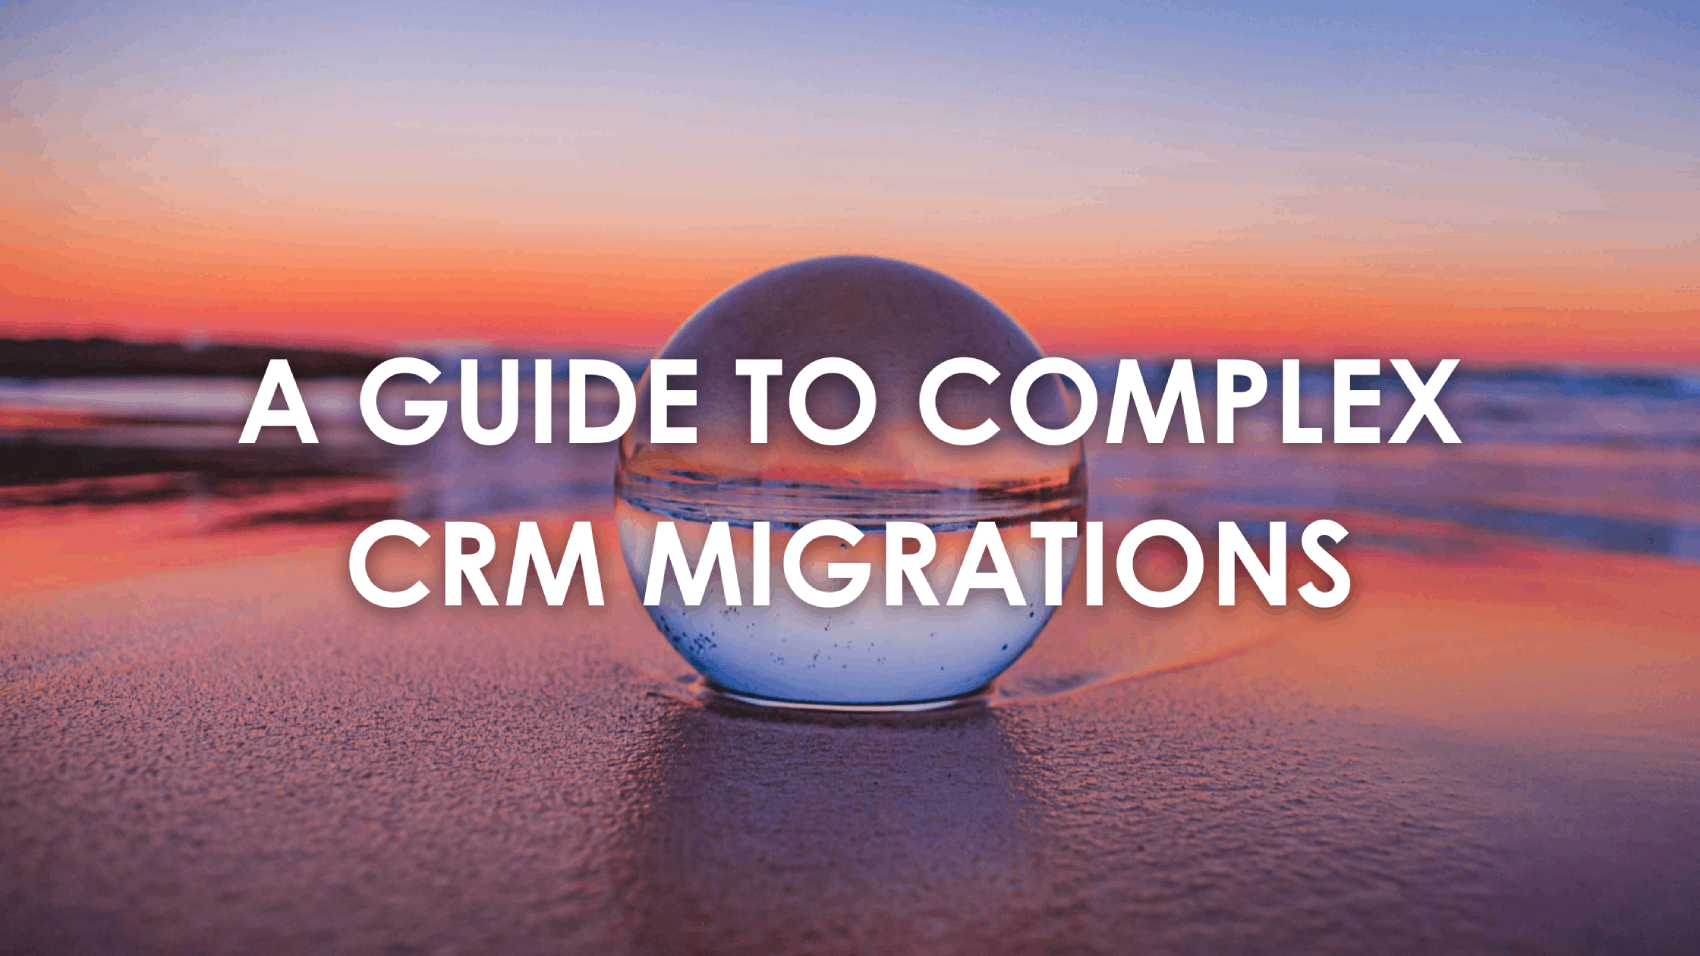 A guide to complex CRM migrations